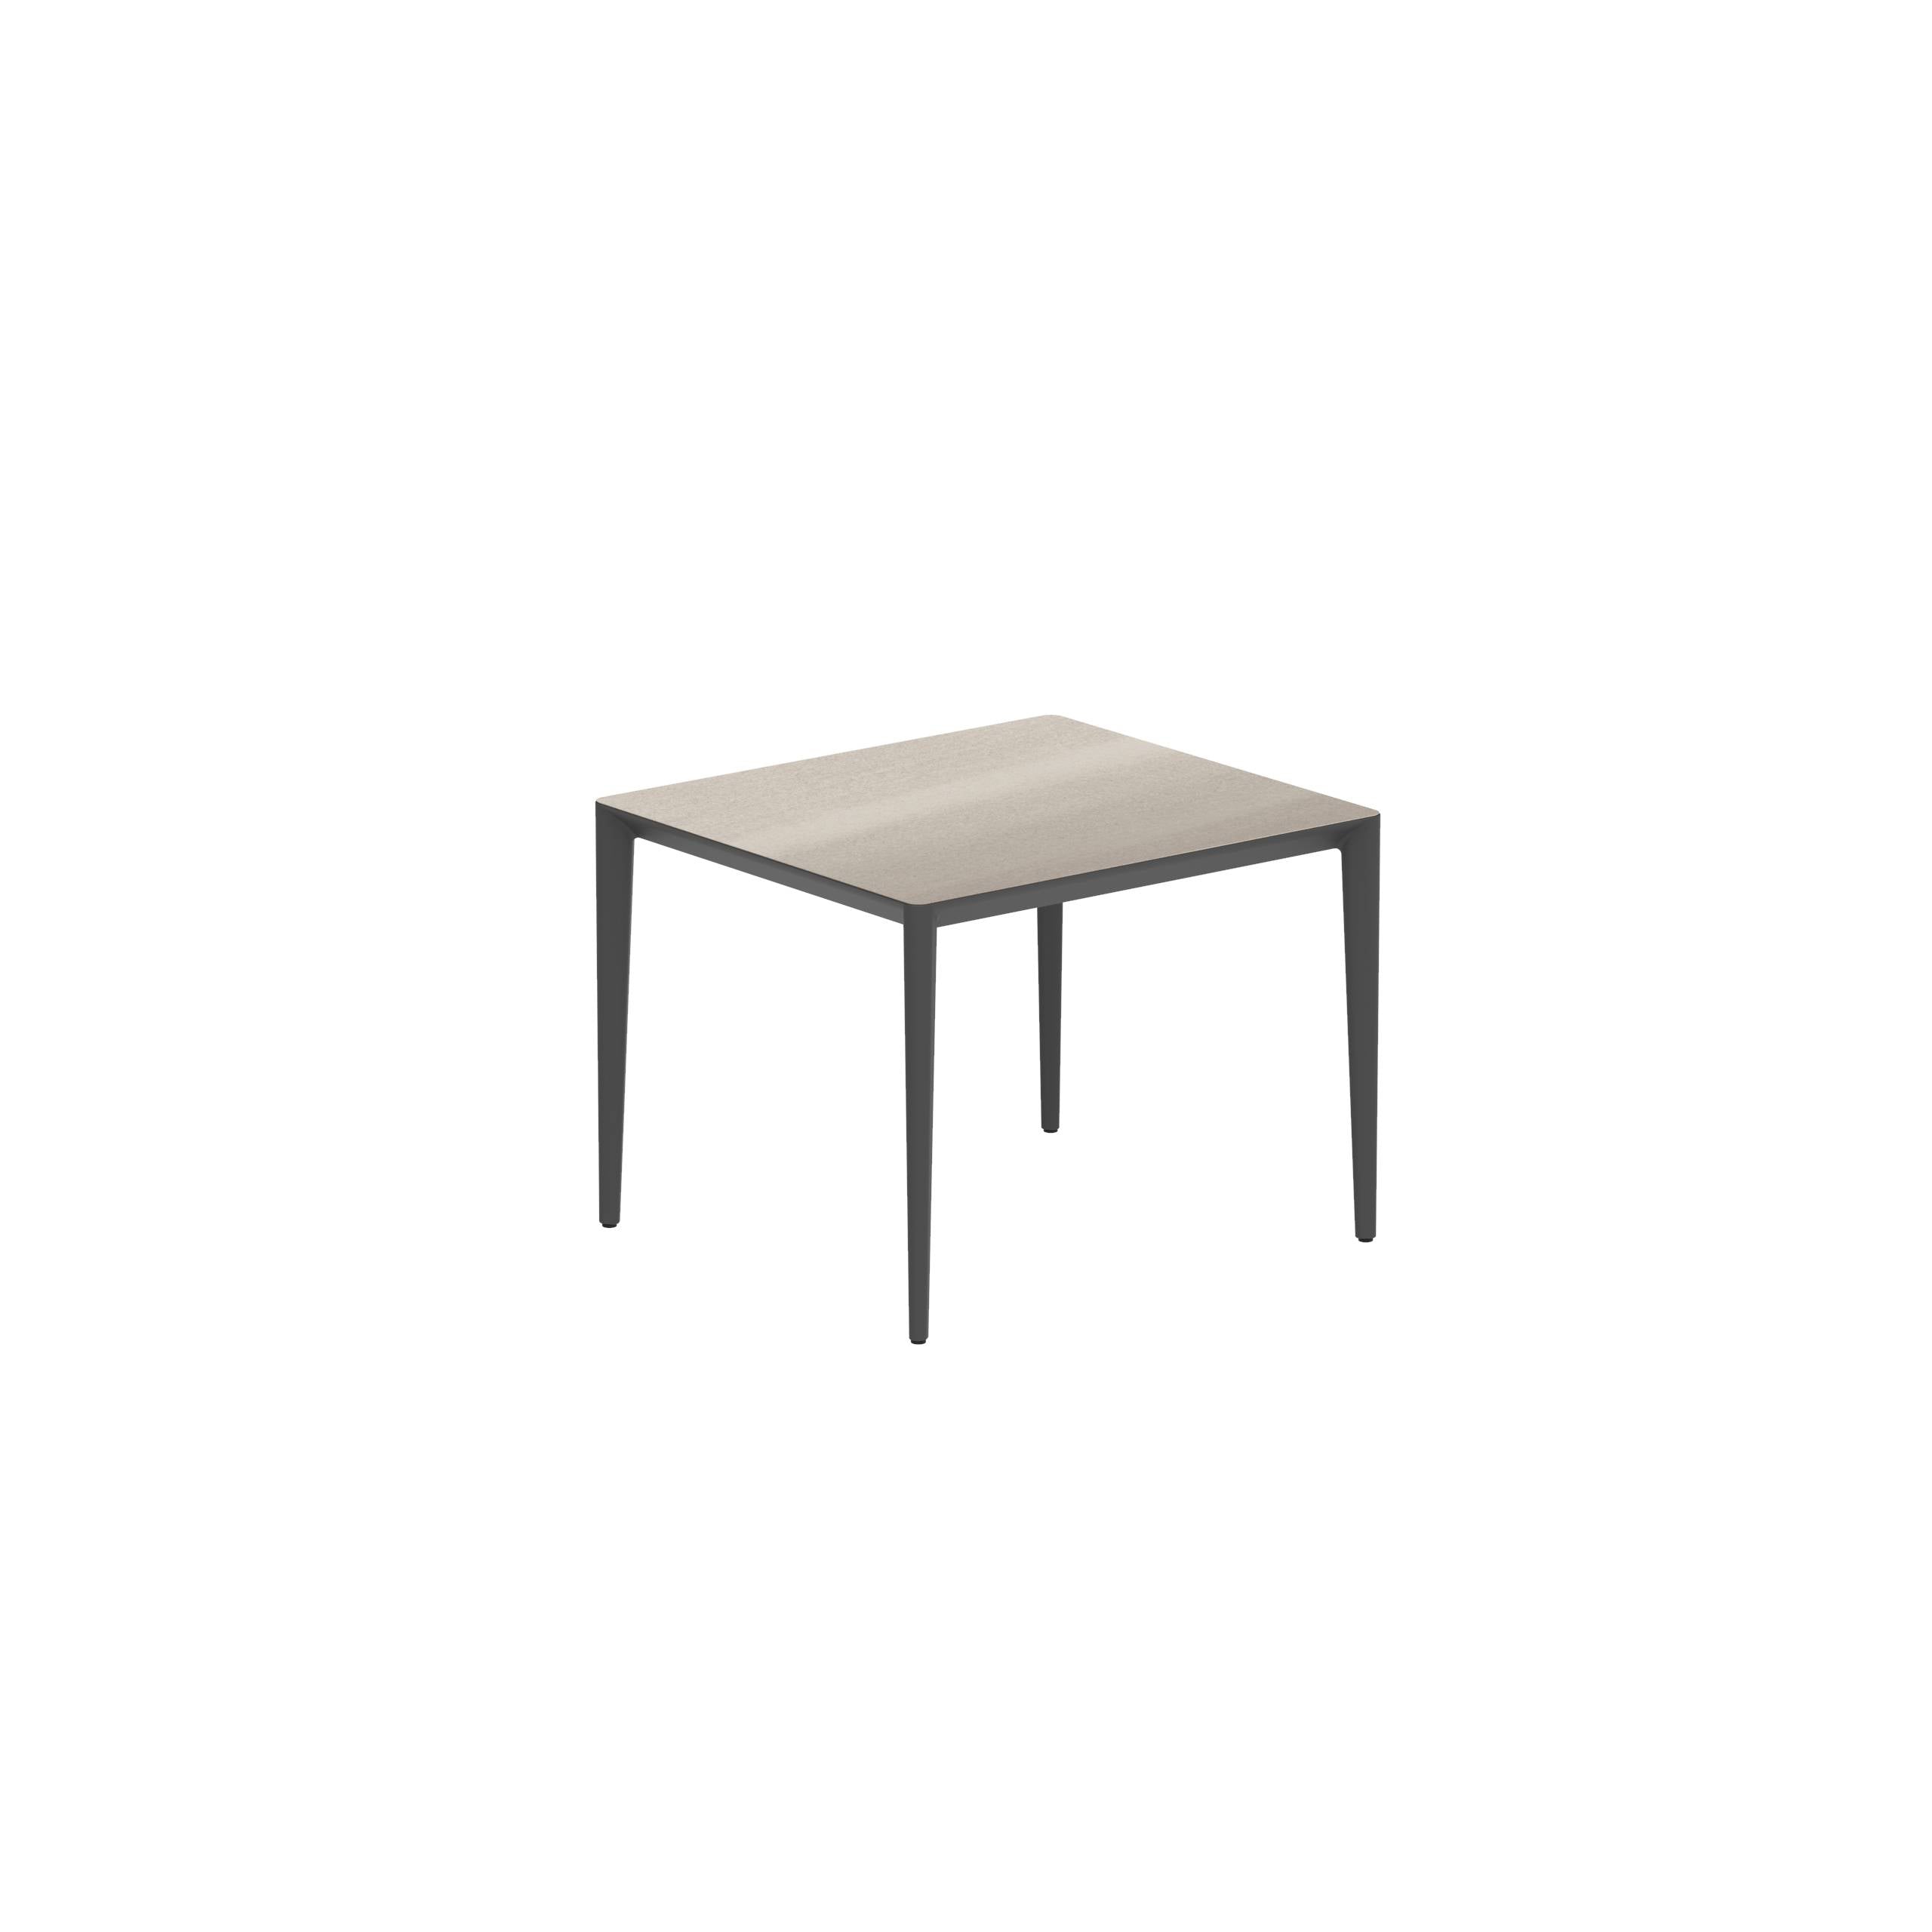 U-Nite Table 100x90cm Anthracite With Ceramic Tabletop In Taupe Grey